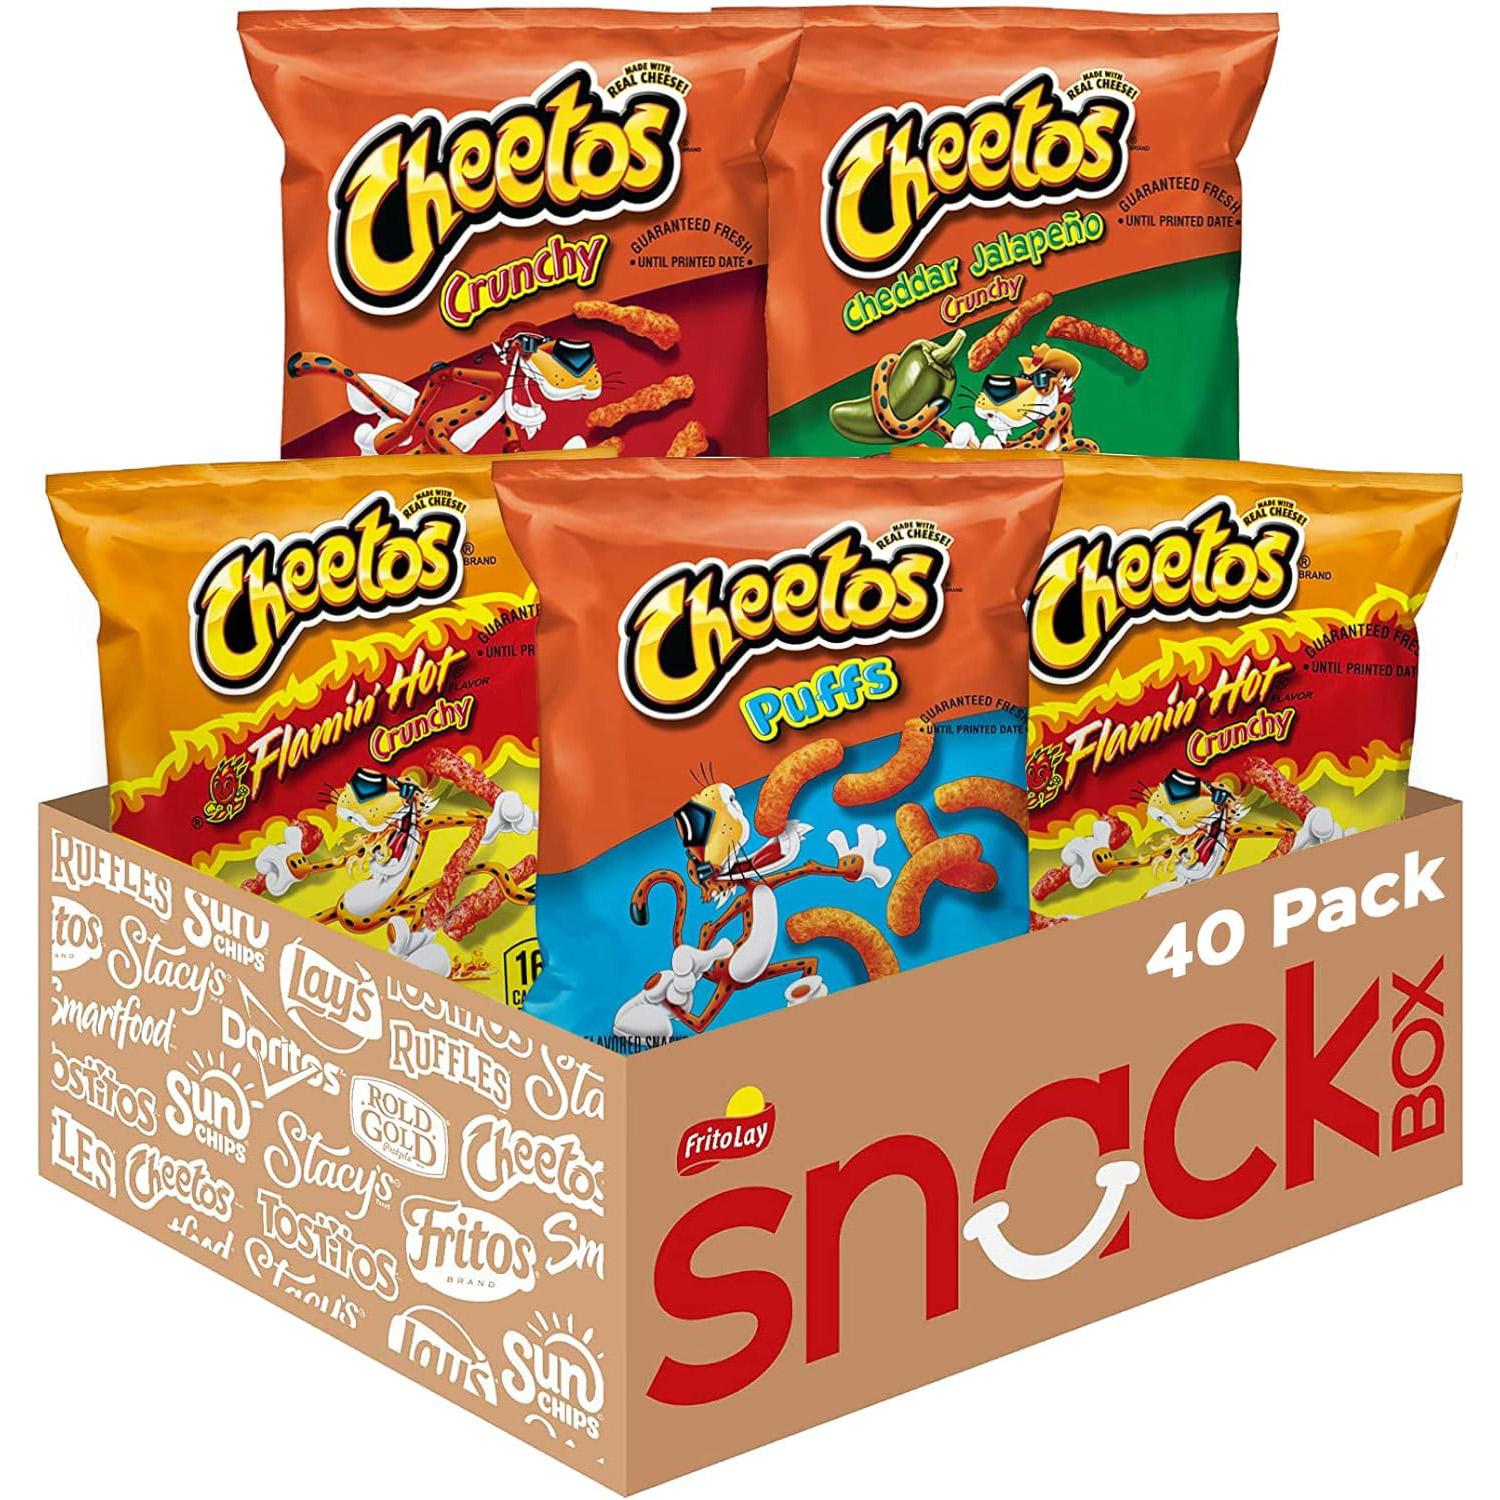 Cheetos Cheese Flavored Snacks Variety Pack 40-Pack for $15.28